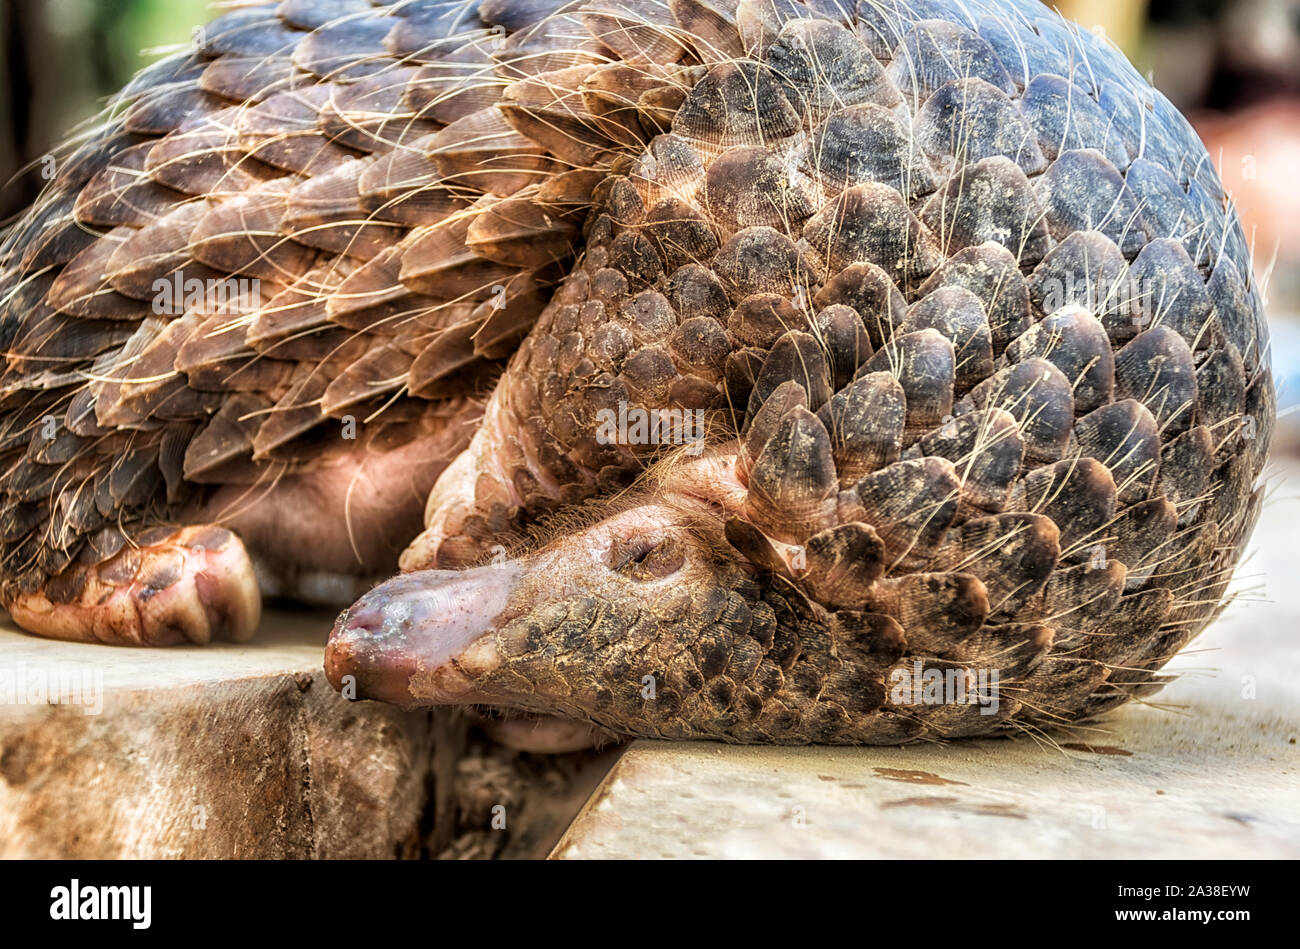 Close-up of a pangolin curled up on a wall, Indonesia Stock Photo